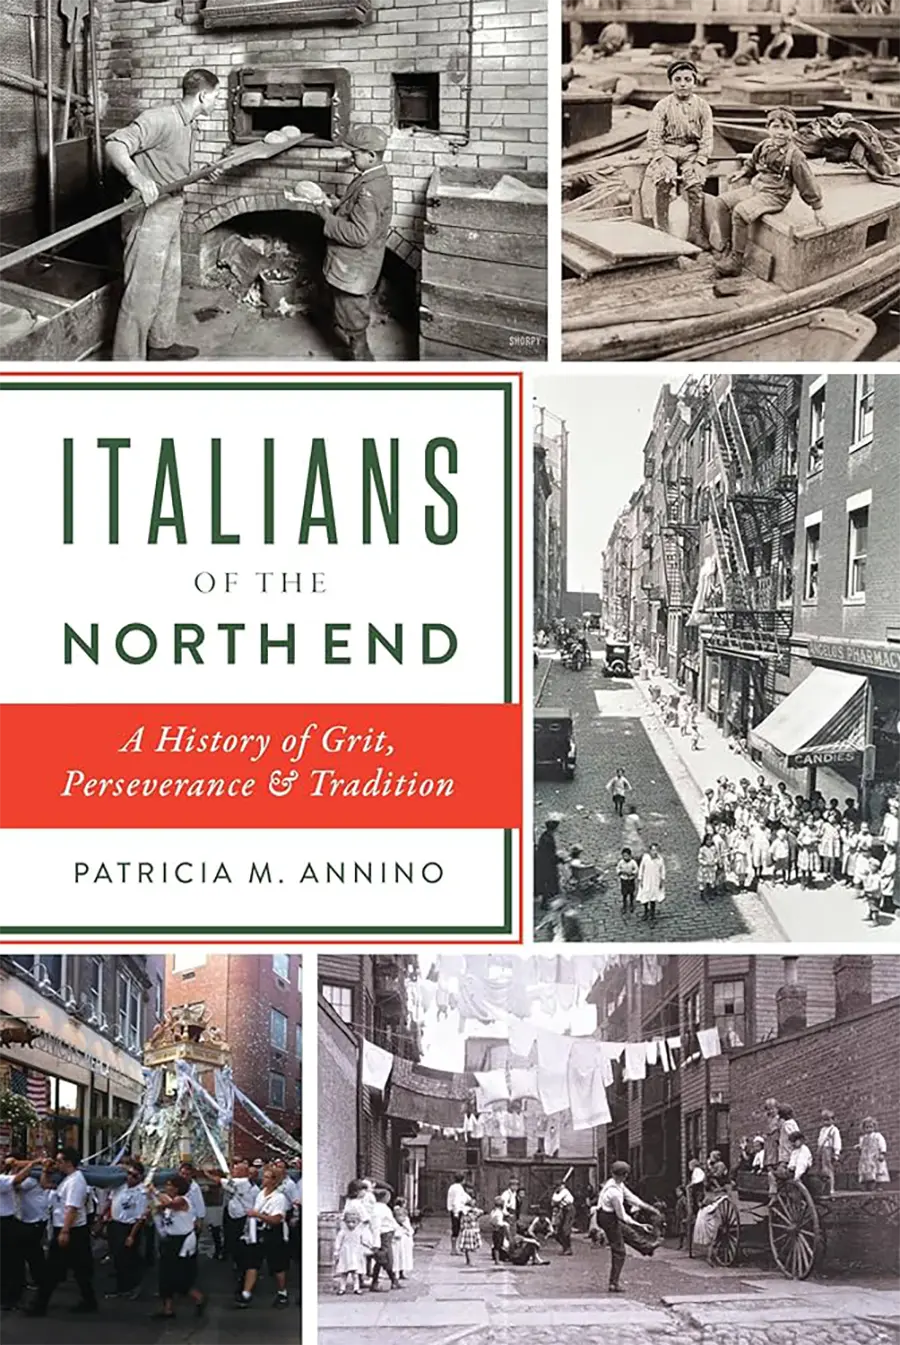 Italians of the North End: A History of Grit, Perseverance & Tradition by Patricia Annino